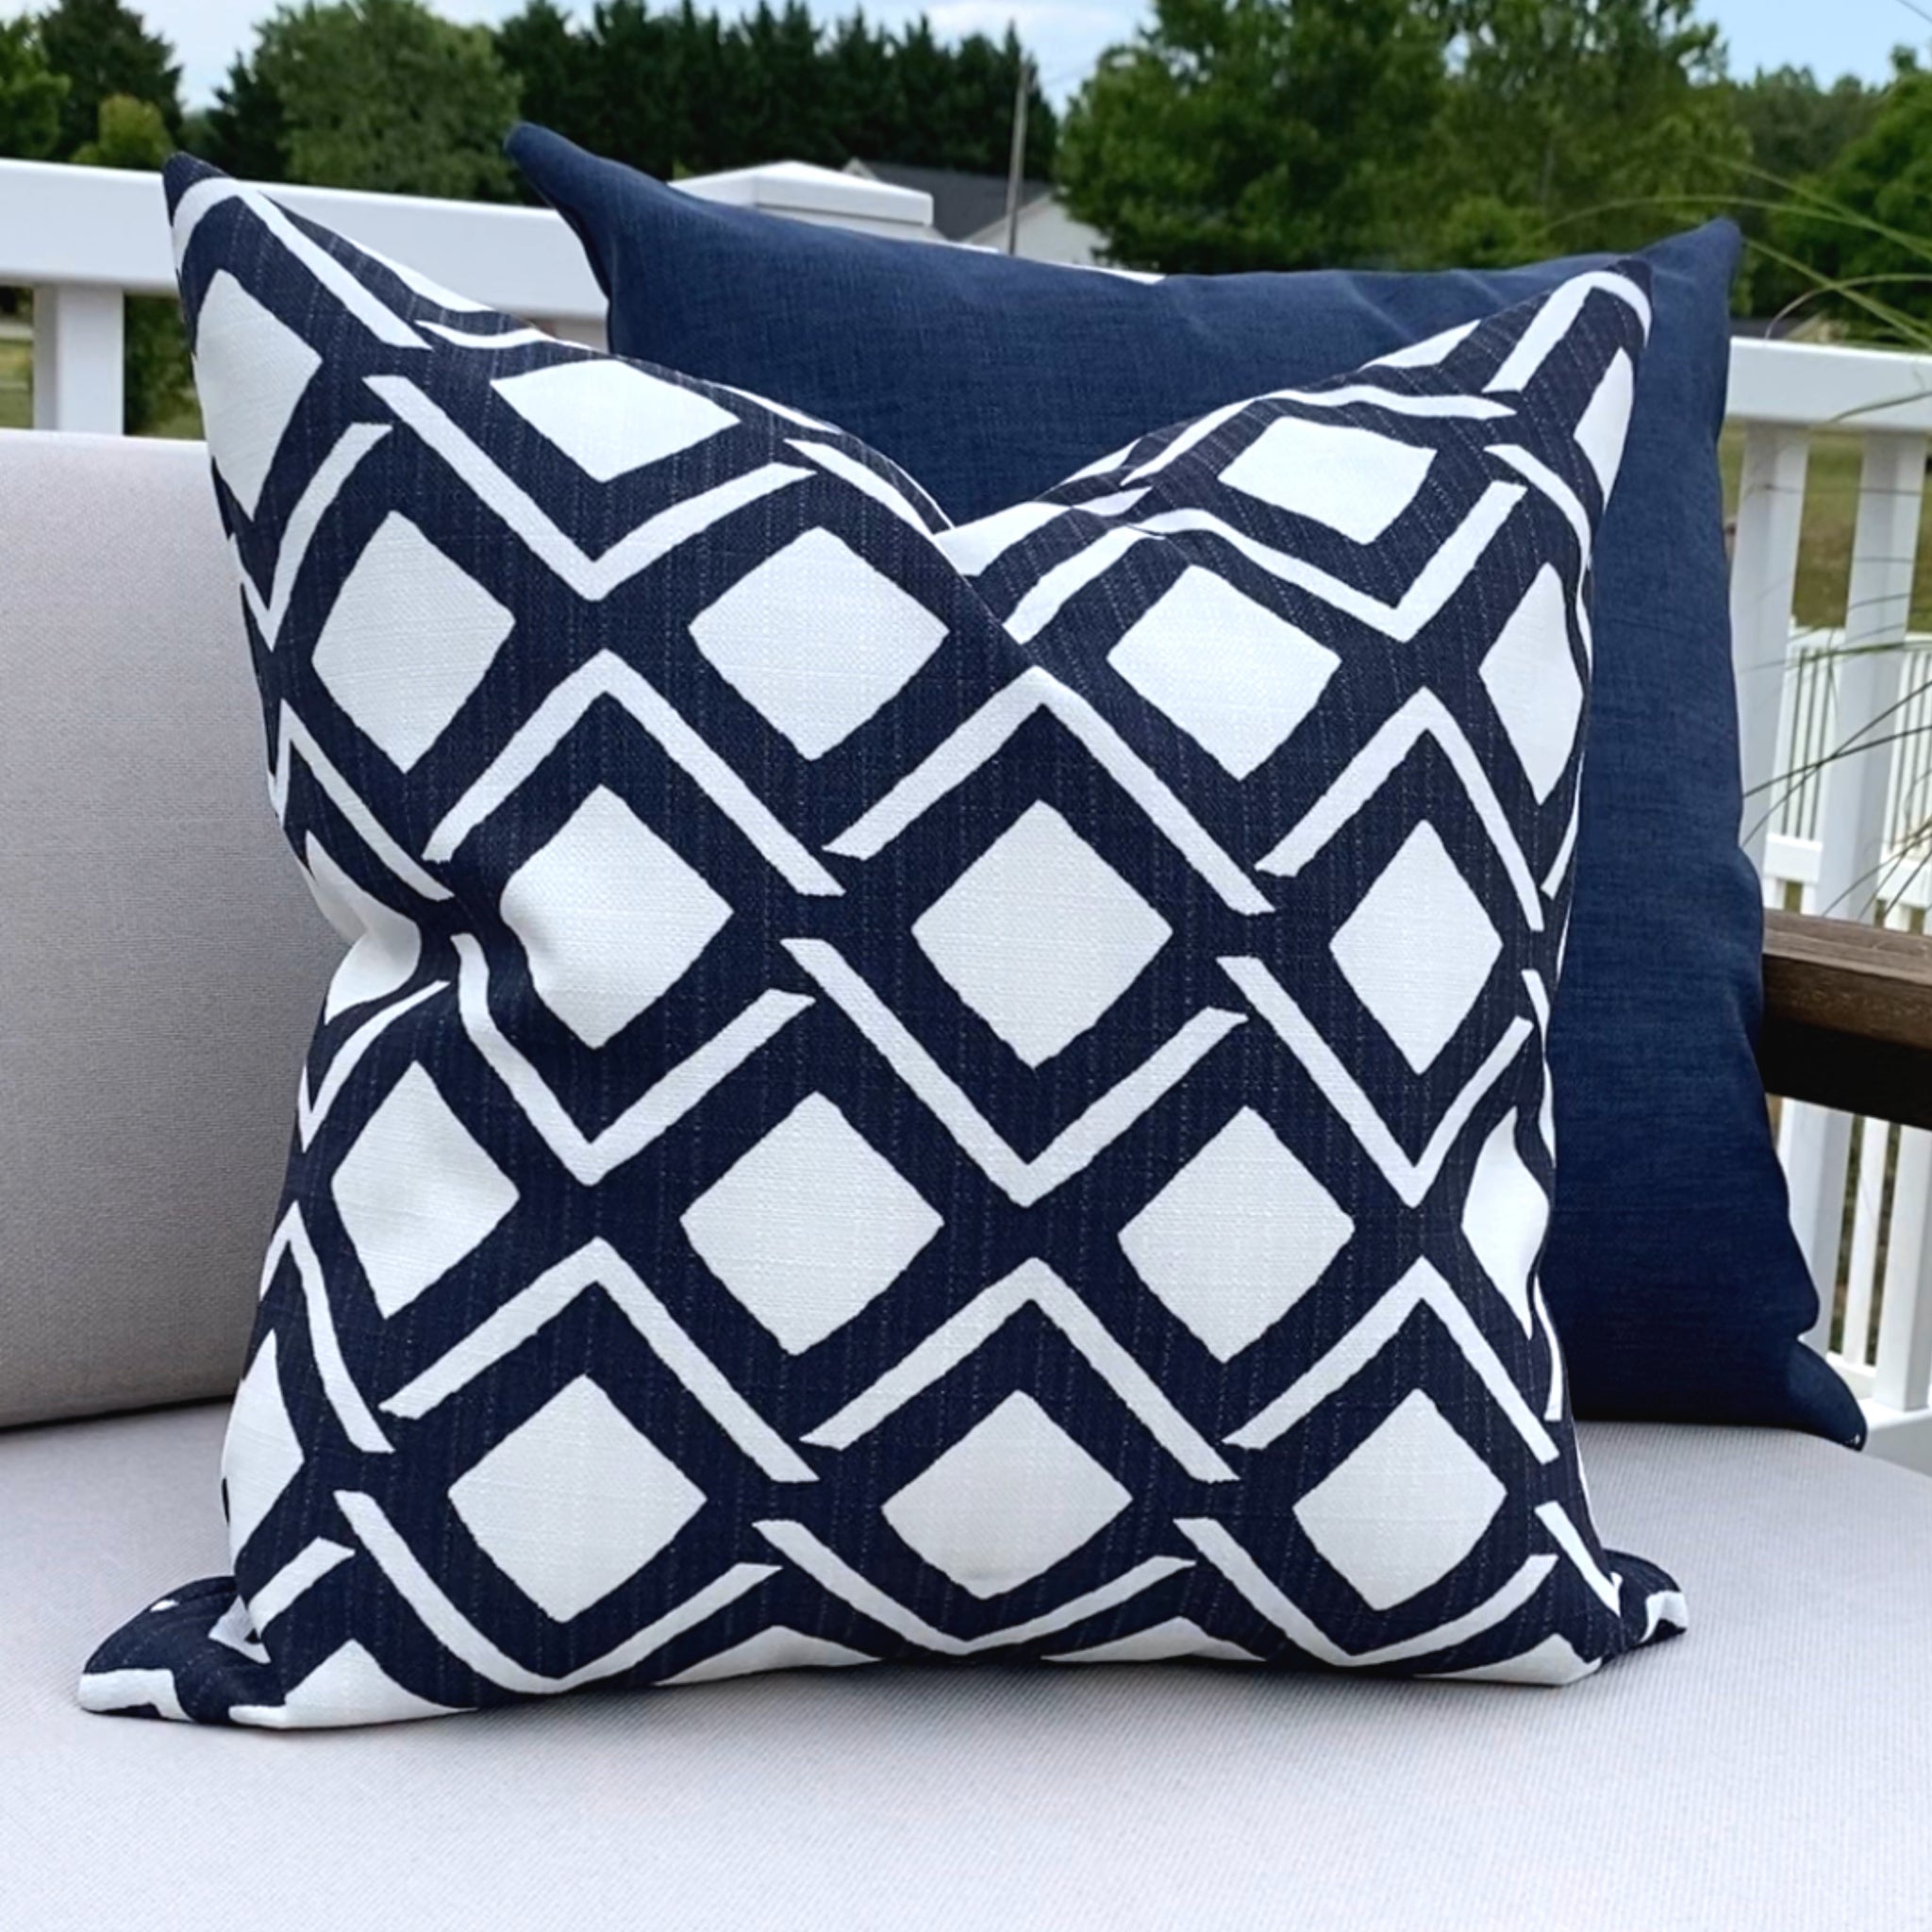 Blue and White Pillow, Blue Geometric Pillow Cover, Blue Geometric Outdoor Pillow Cover, Blue Outdoor Pillow Cover, Blue and White outdoor pillow, Hackner Home outdoor pillow cover, Designer Pillows, Decorative Pillow Cover, Navy Blue Pillow Cover, High End Outdoor Pillow Cover